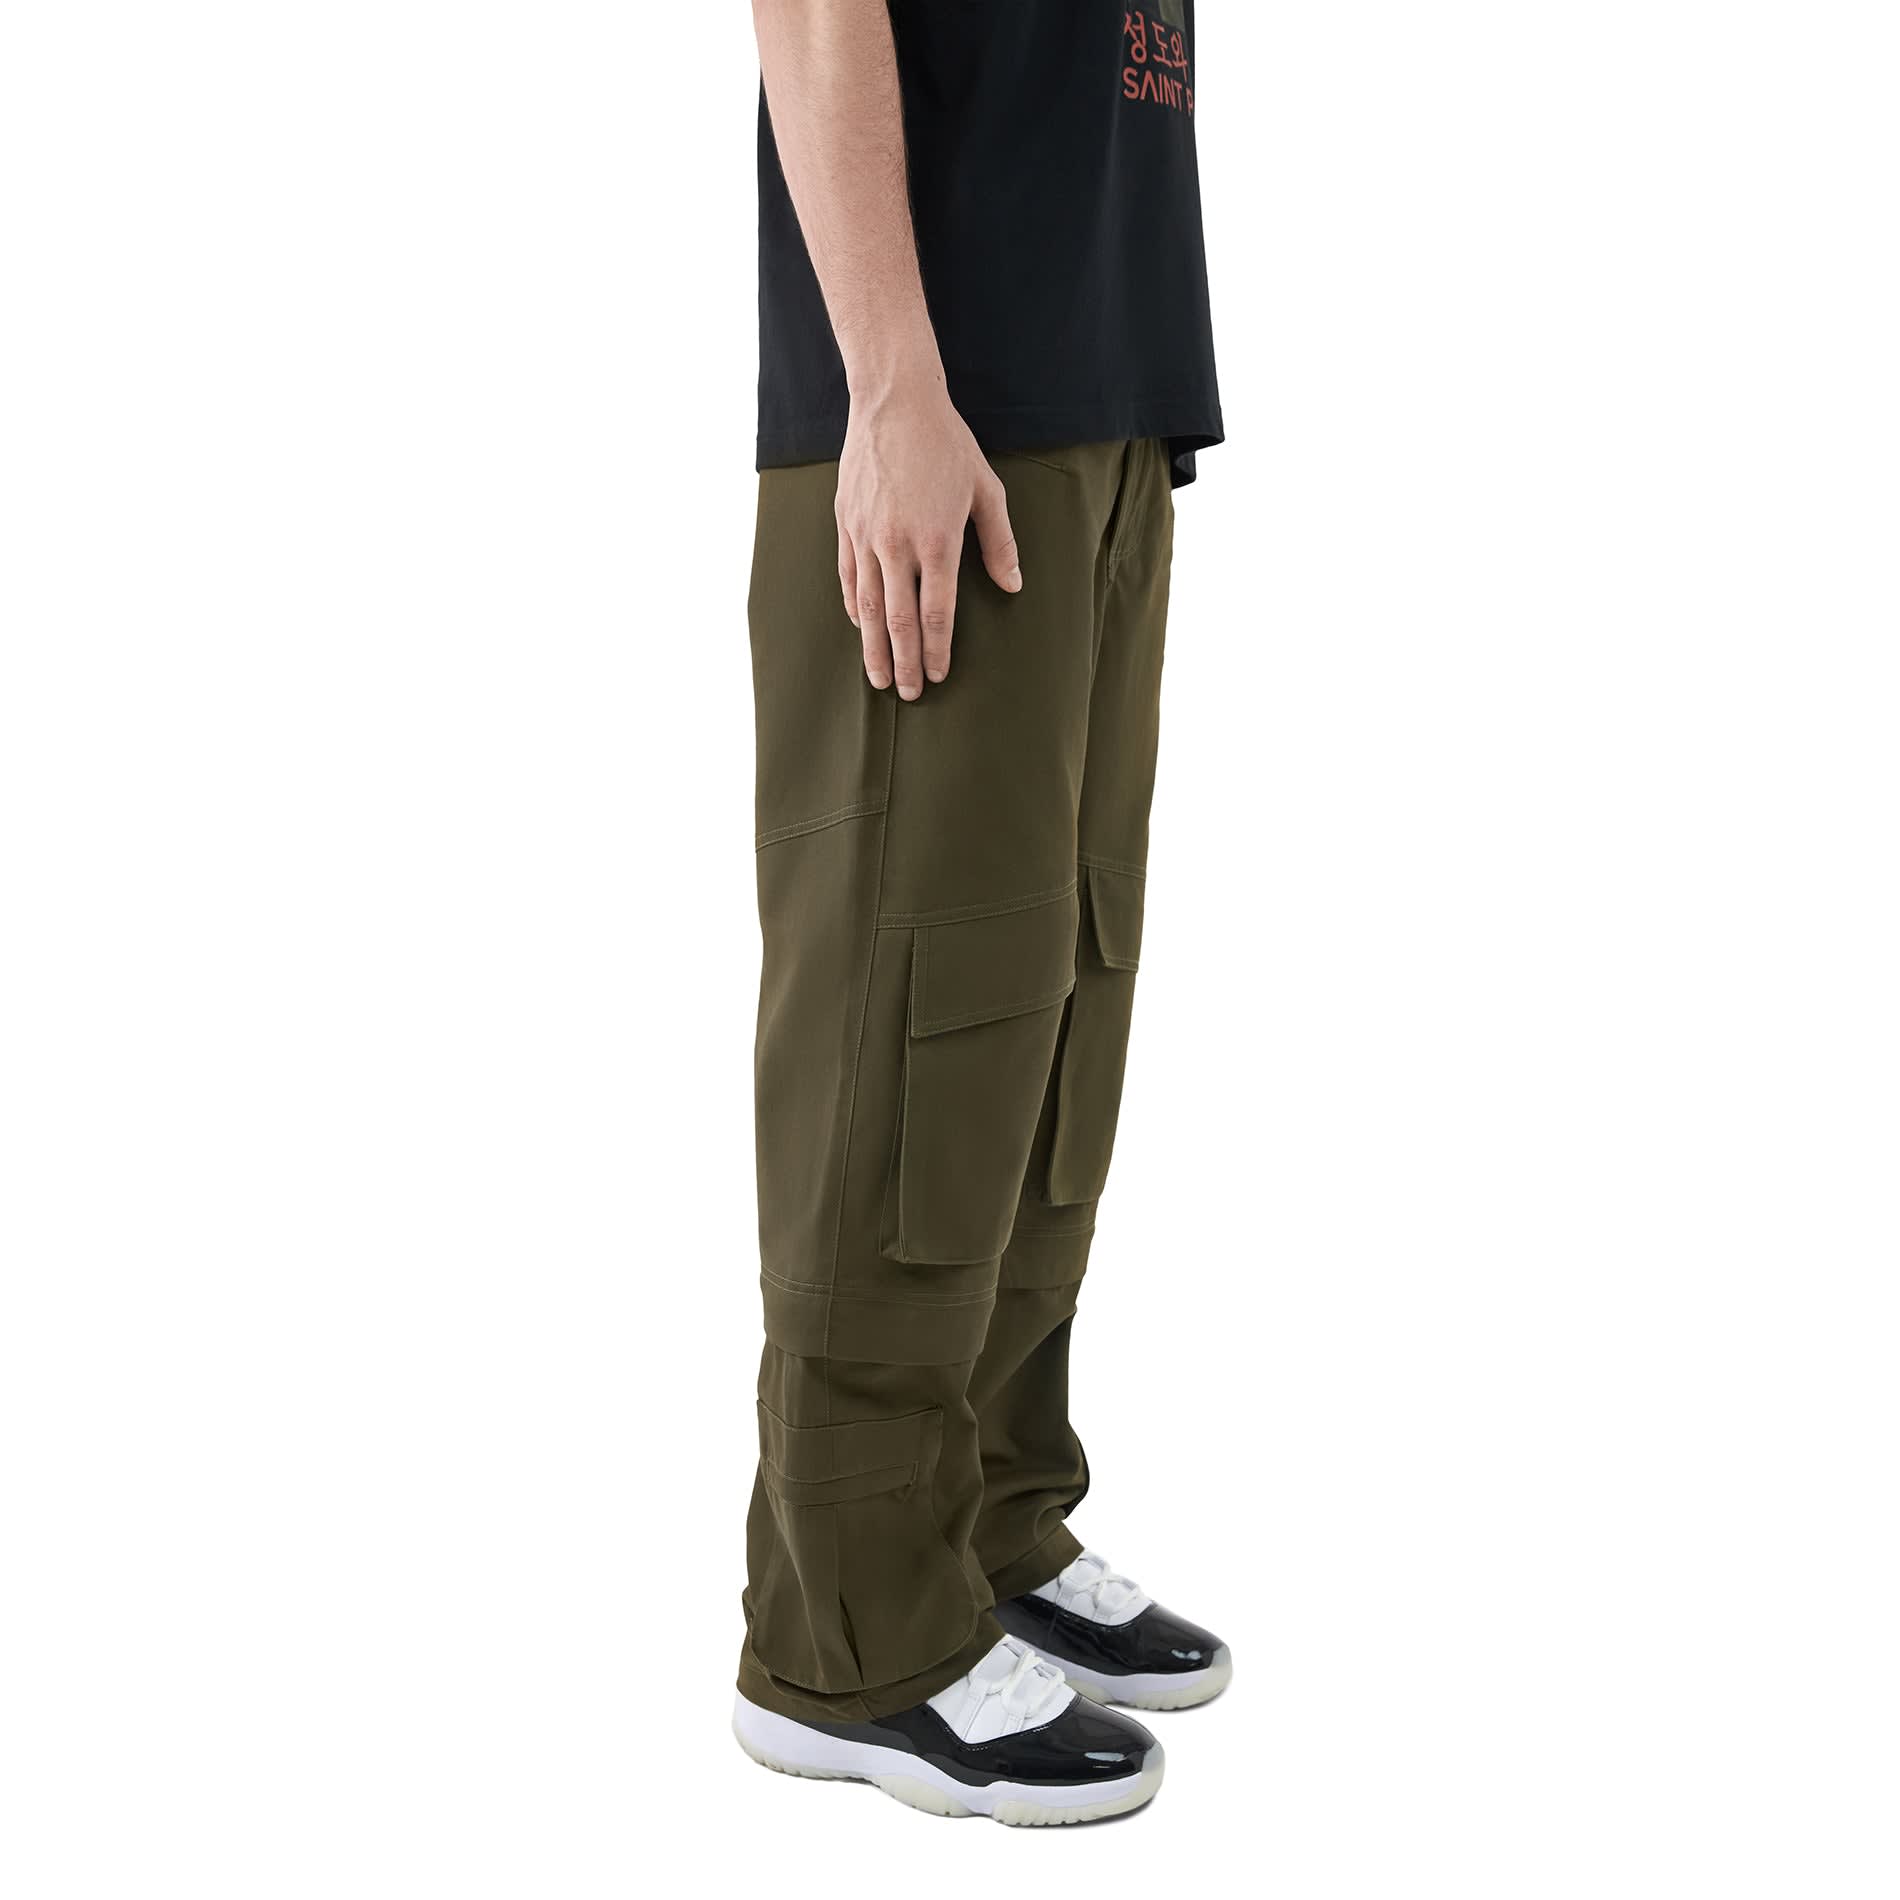 CHP-1 006 WASHED GREY MULTI-POCKET FLARED CARGO PANTS – ERIC CRÉER